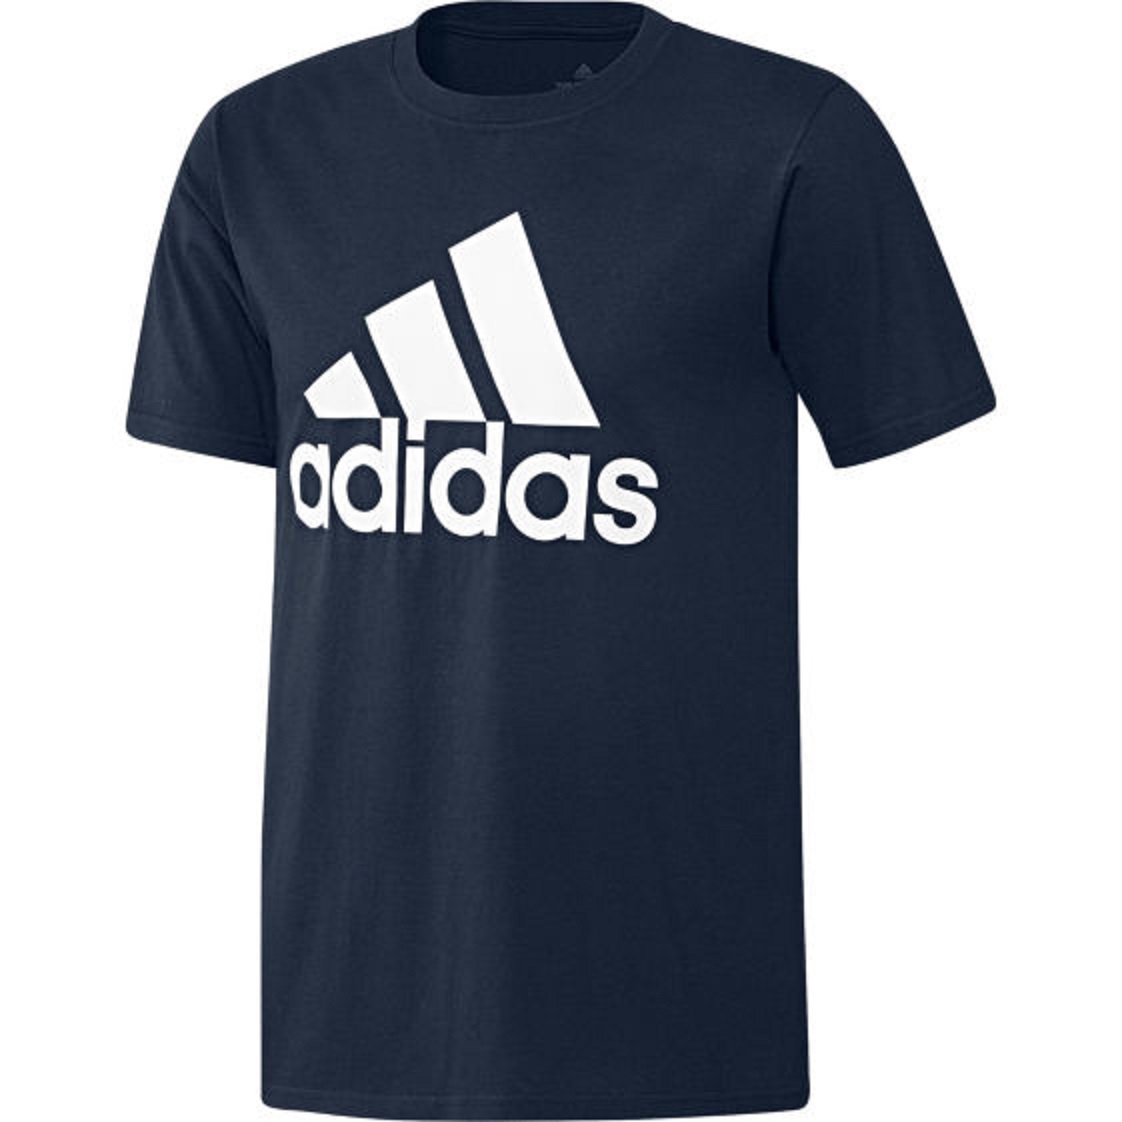 Men's Adidas Clothing - JCPenney